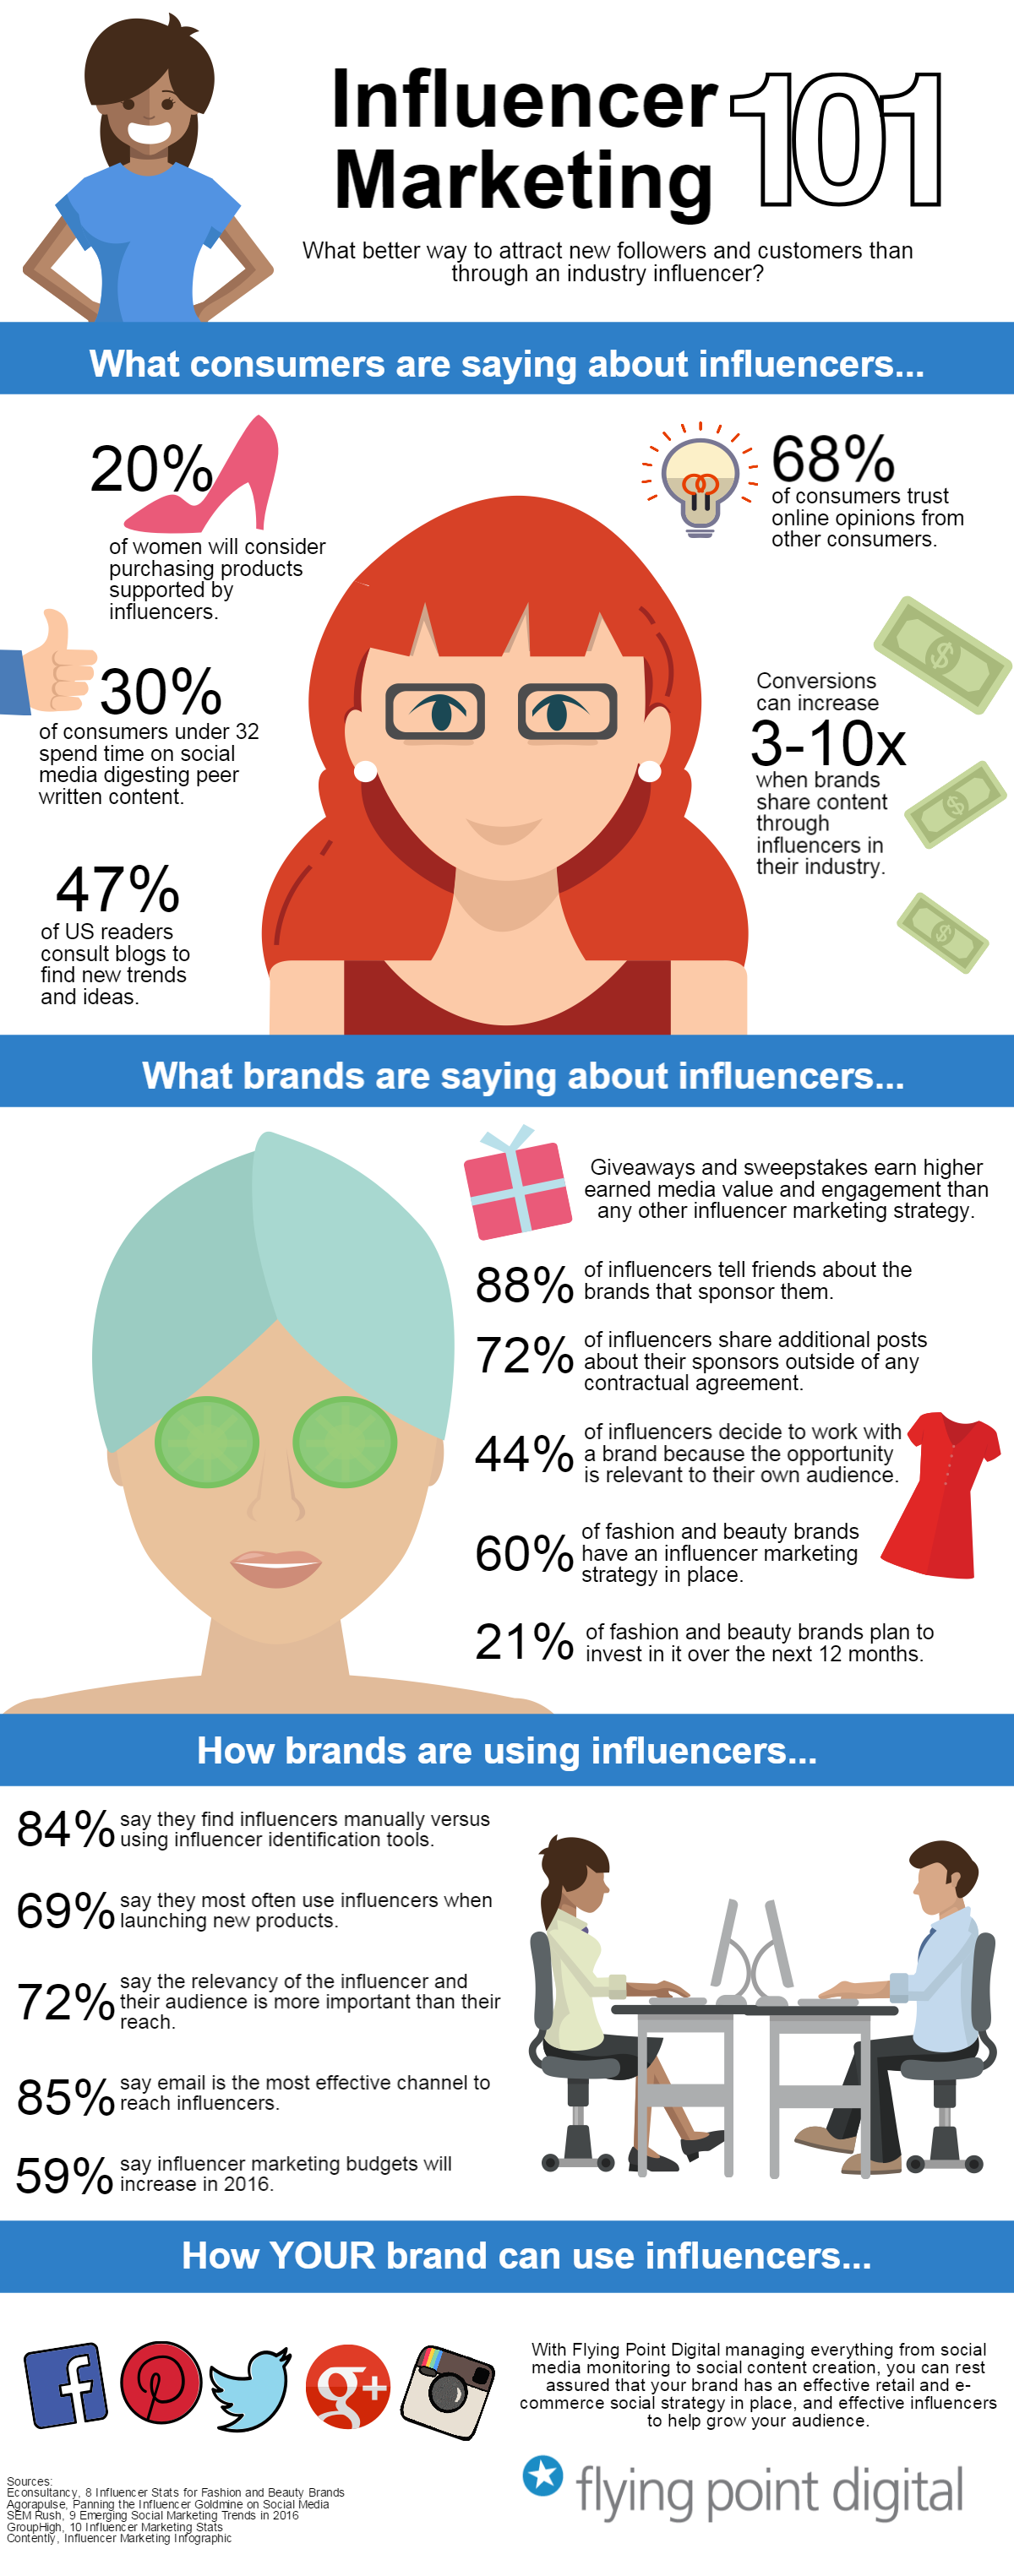 Influencer Marketing Strategy in 2016 [Infographic]